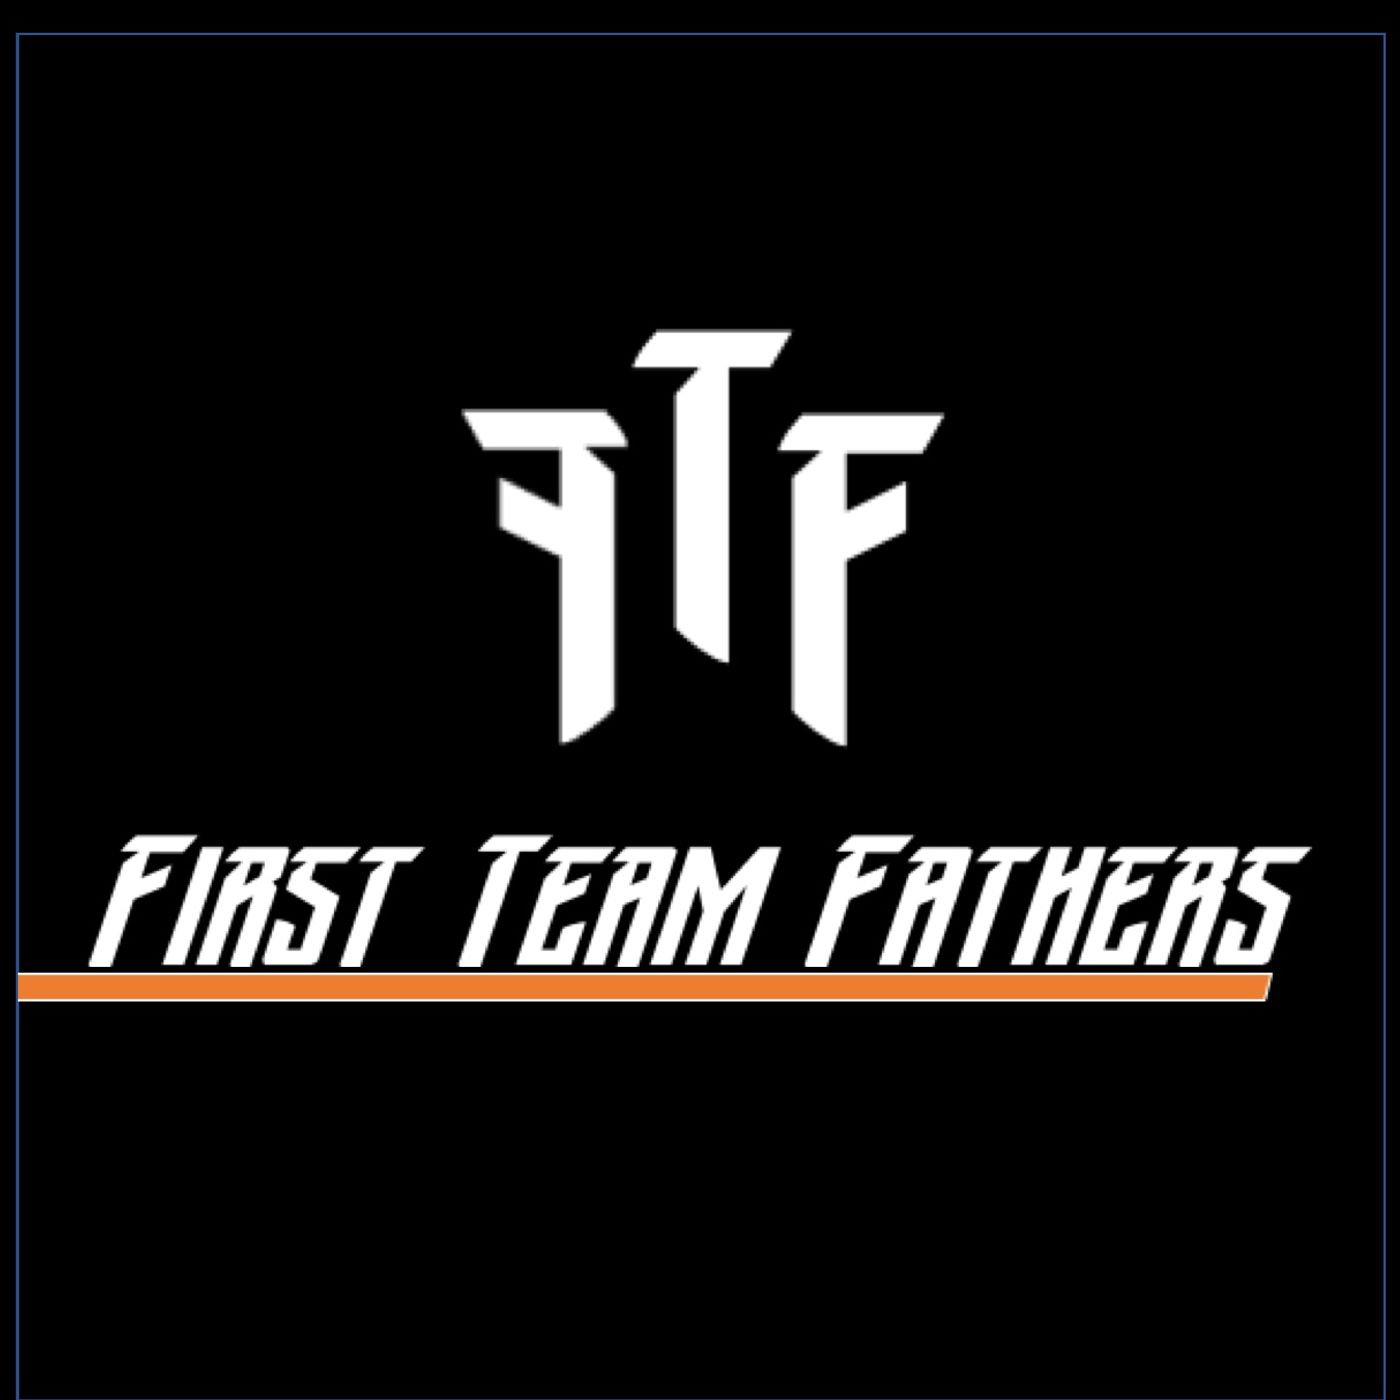 First Team Fathers